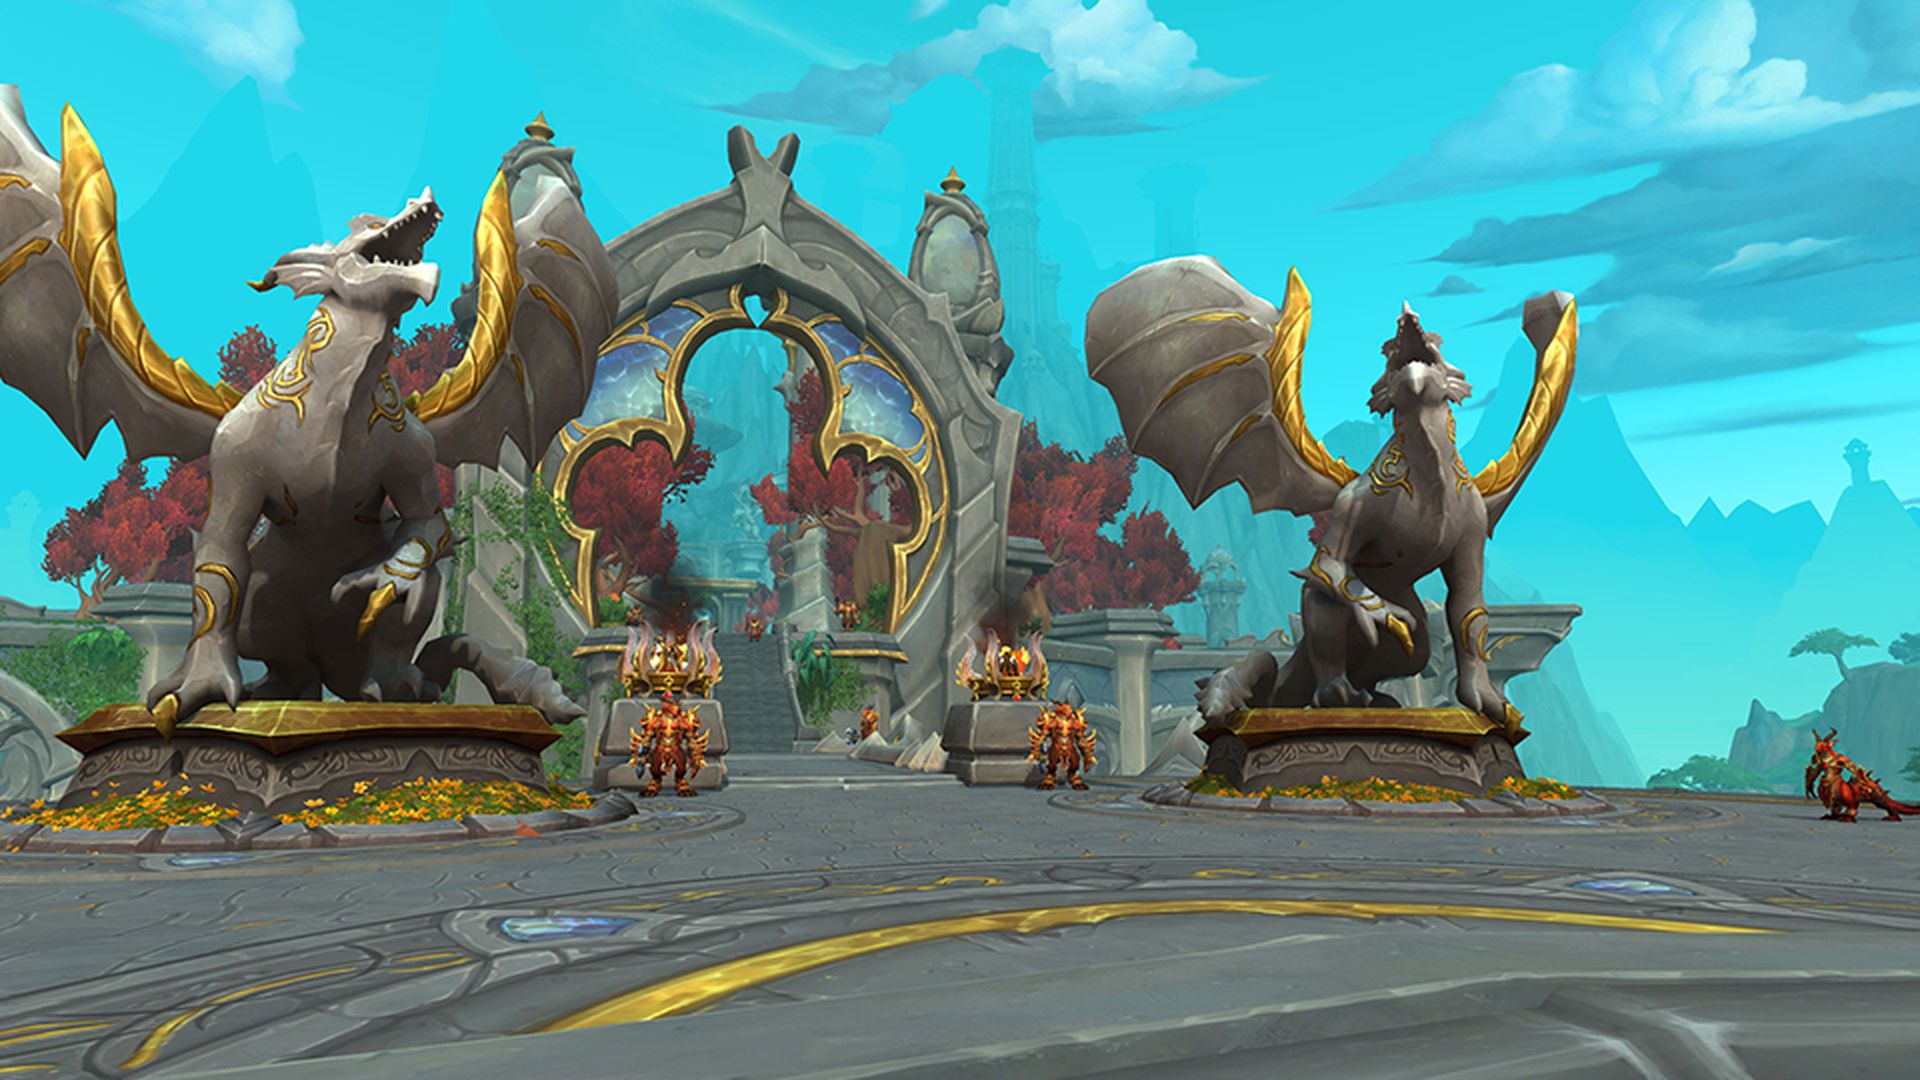 In this article, we will be covering WoW Dragonflight Beta sign-up in 4 easy steps, so you get the chance to be in the Beta and play the game earlier.